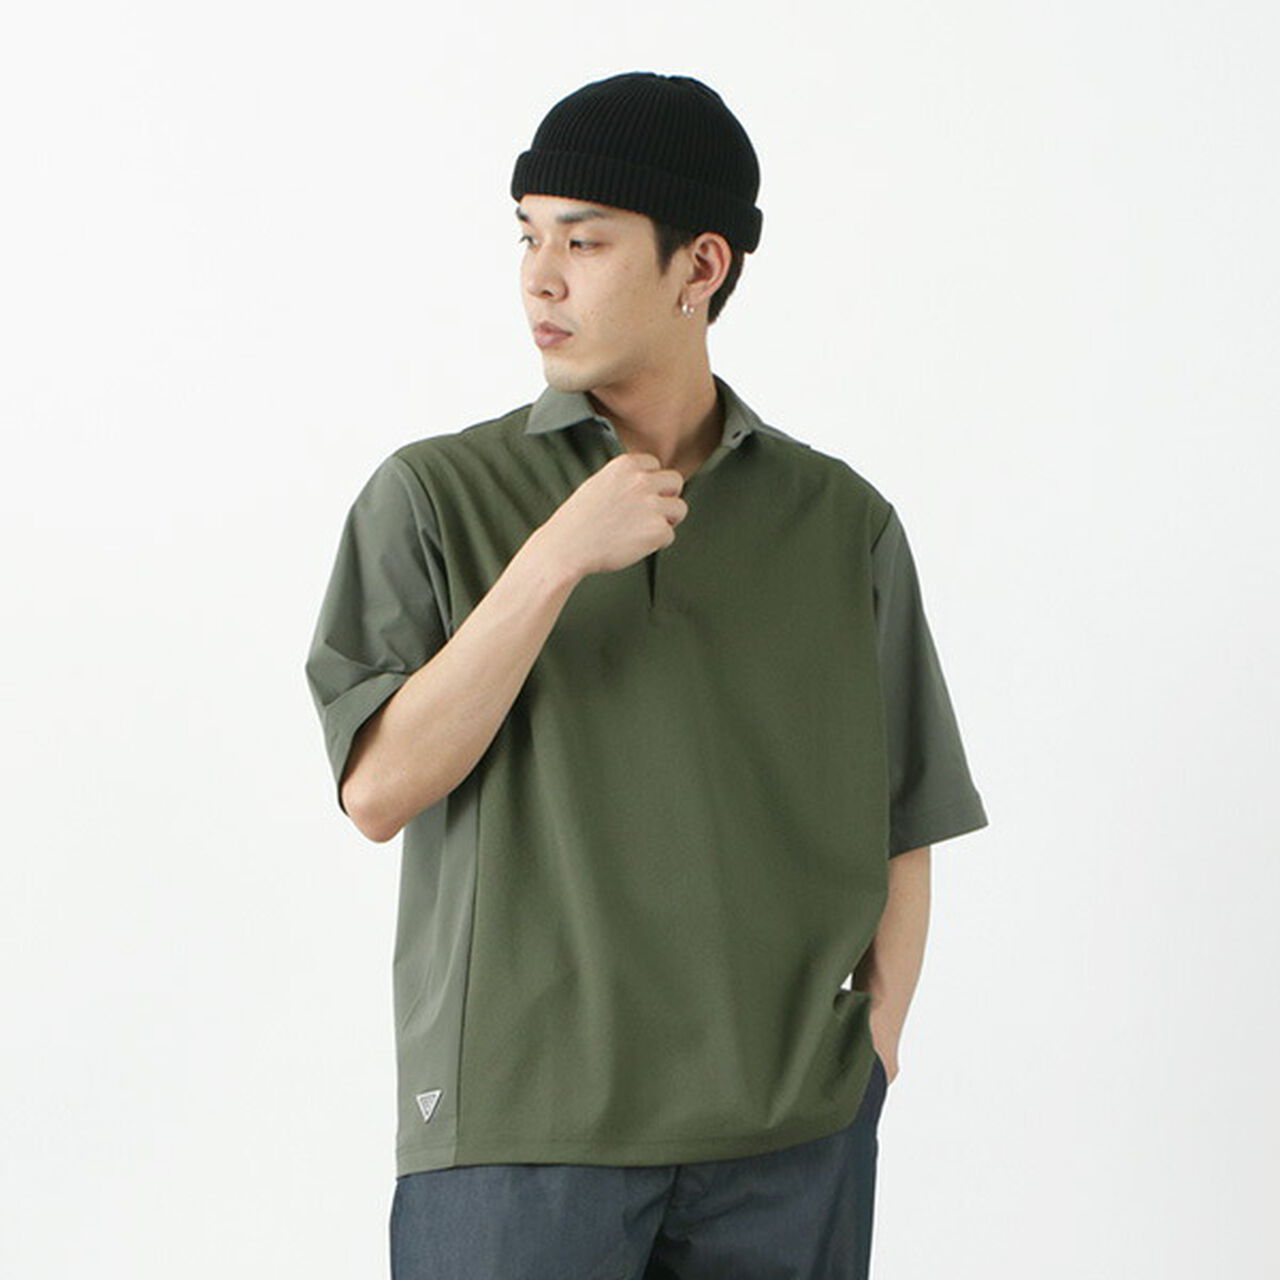 Ice x Dry polo,Olive, large image number 0